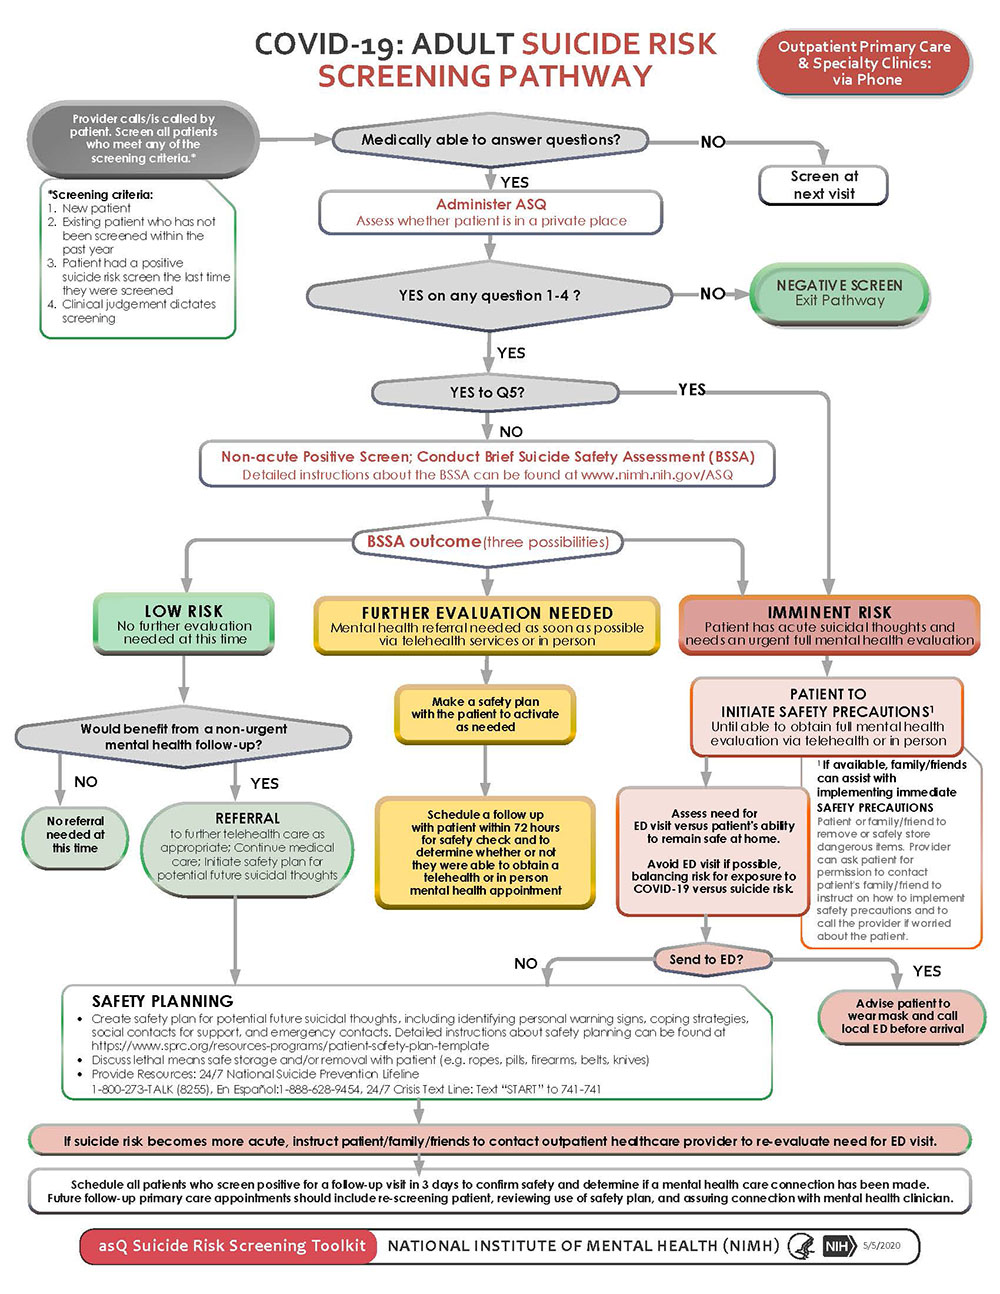 COVID-19 ADULT Clinical Pathway chart image - please see link for full description